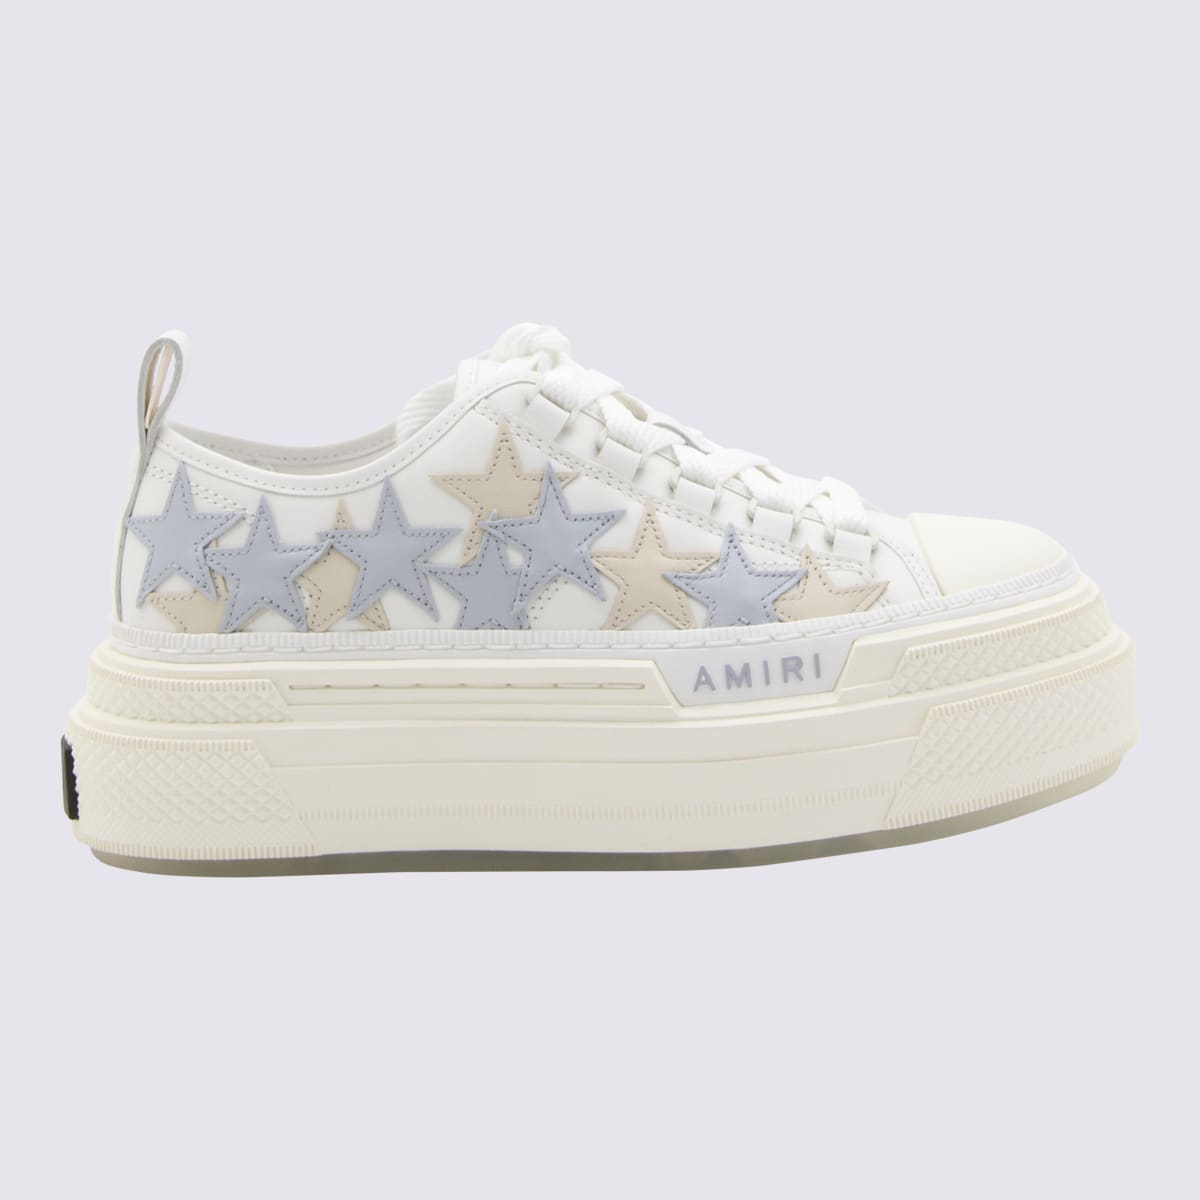 AMIRI WHITE AND BLUE LEATHER SNEAKERS